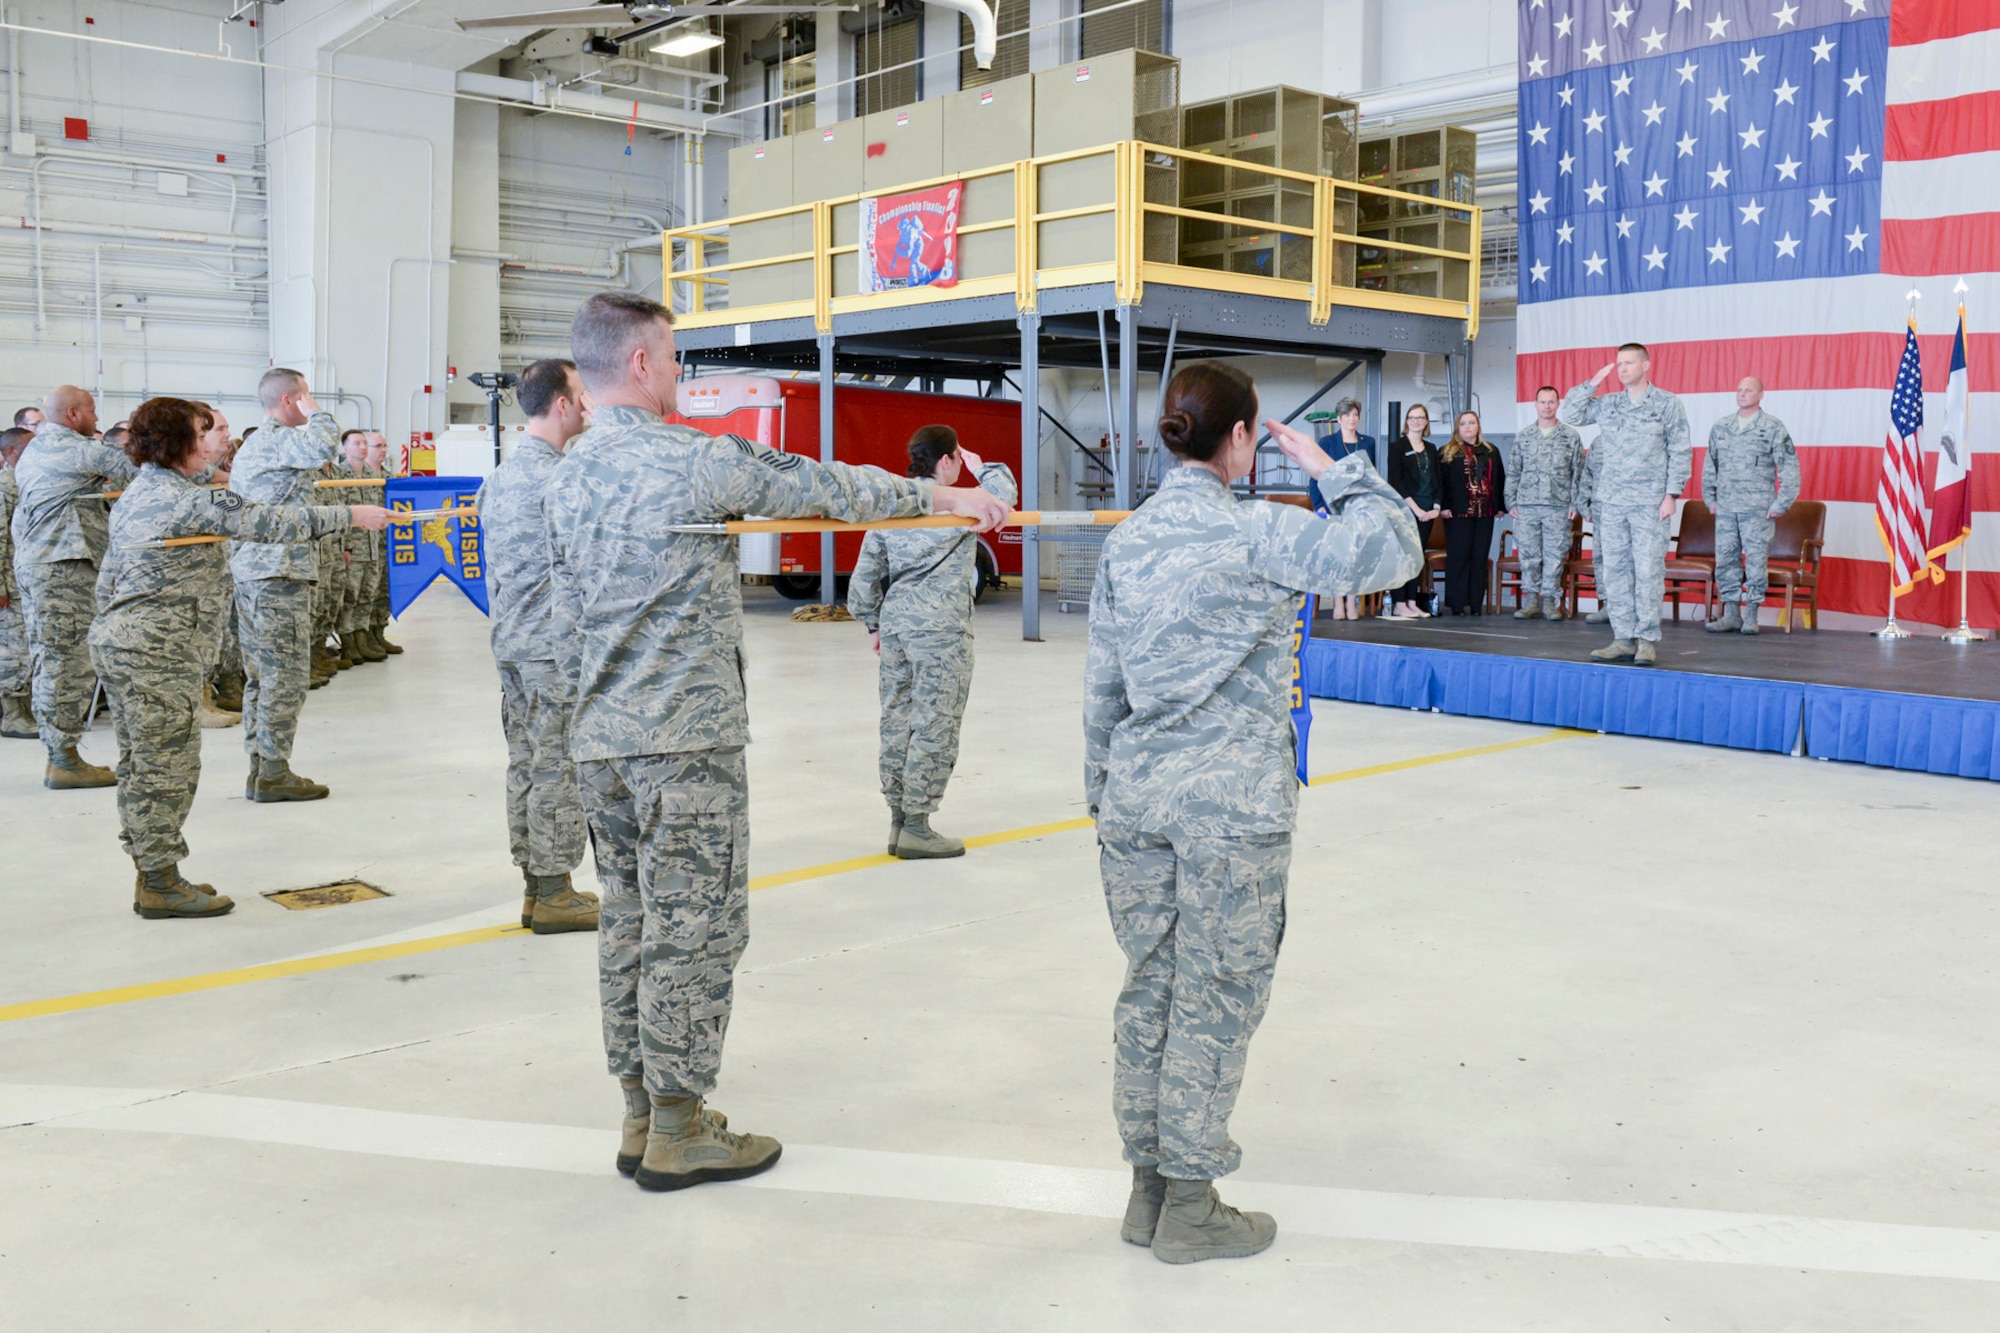 Members of the 132d Wing (132WG), Des Moines, Iowa Intelligence Surveillance Reconnaissance Group (ISRG) (front, saluting) give their first salute to Col. Mark Chidley (back, standing on stage saluting), 132WG ISRG Commander, during the 132WG ISRG Activation Ceremony held in the 132WG Fire House on Saturday, March 7, 2015.  This ceremony formally recognizes the official activation of the 132WG ISRG.  (U.S. Air National Guard photo by Senior Airman Michael J. Kelly/Released)